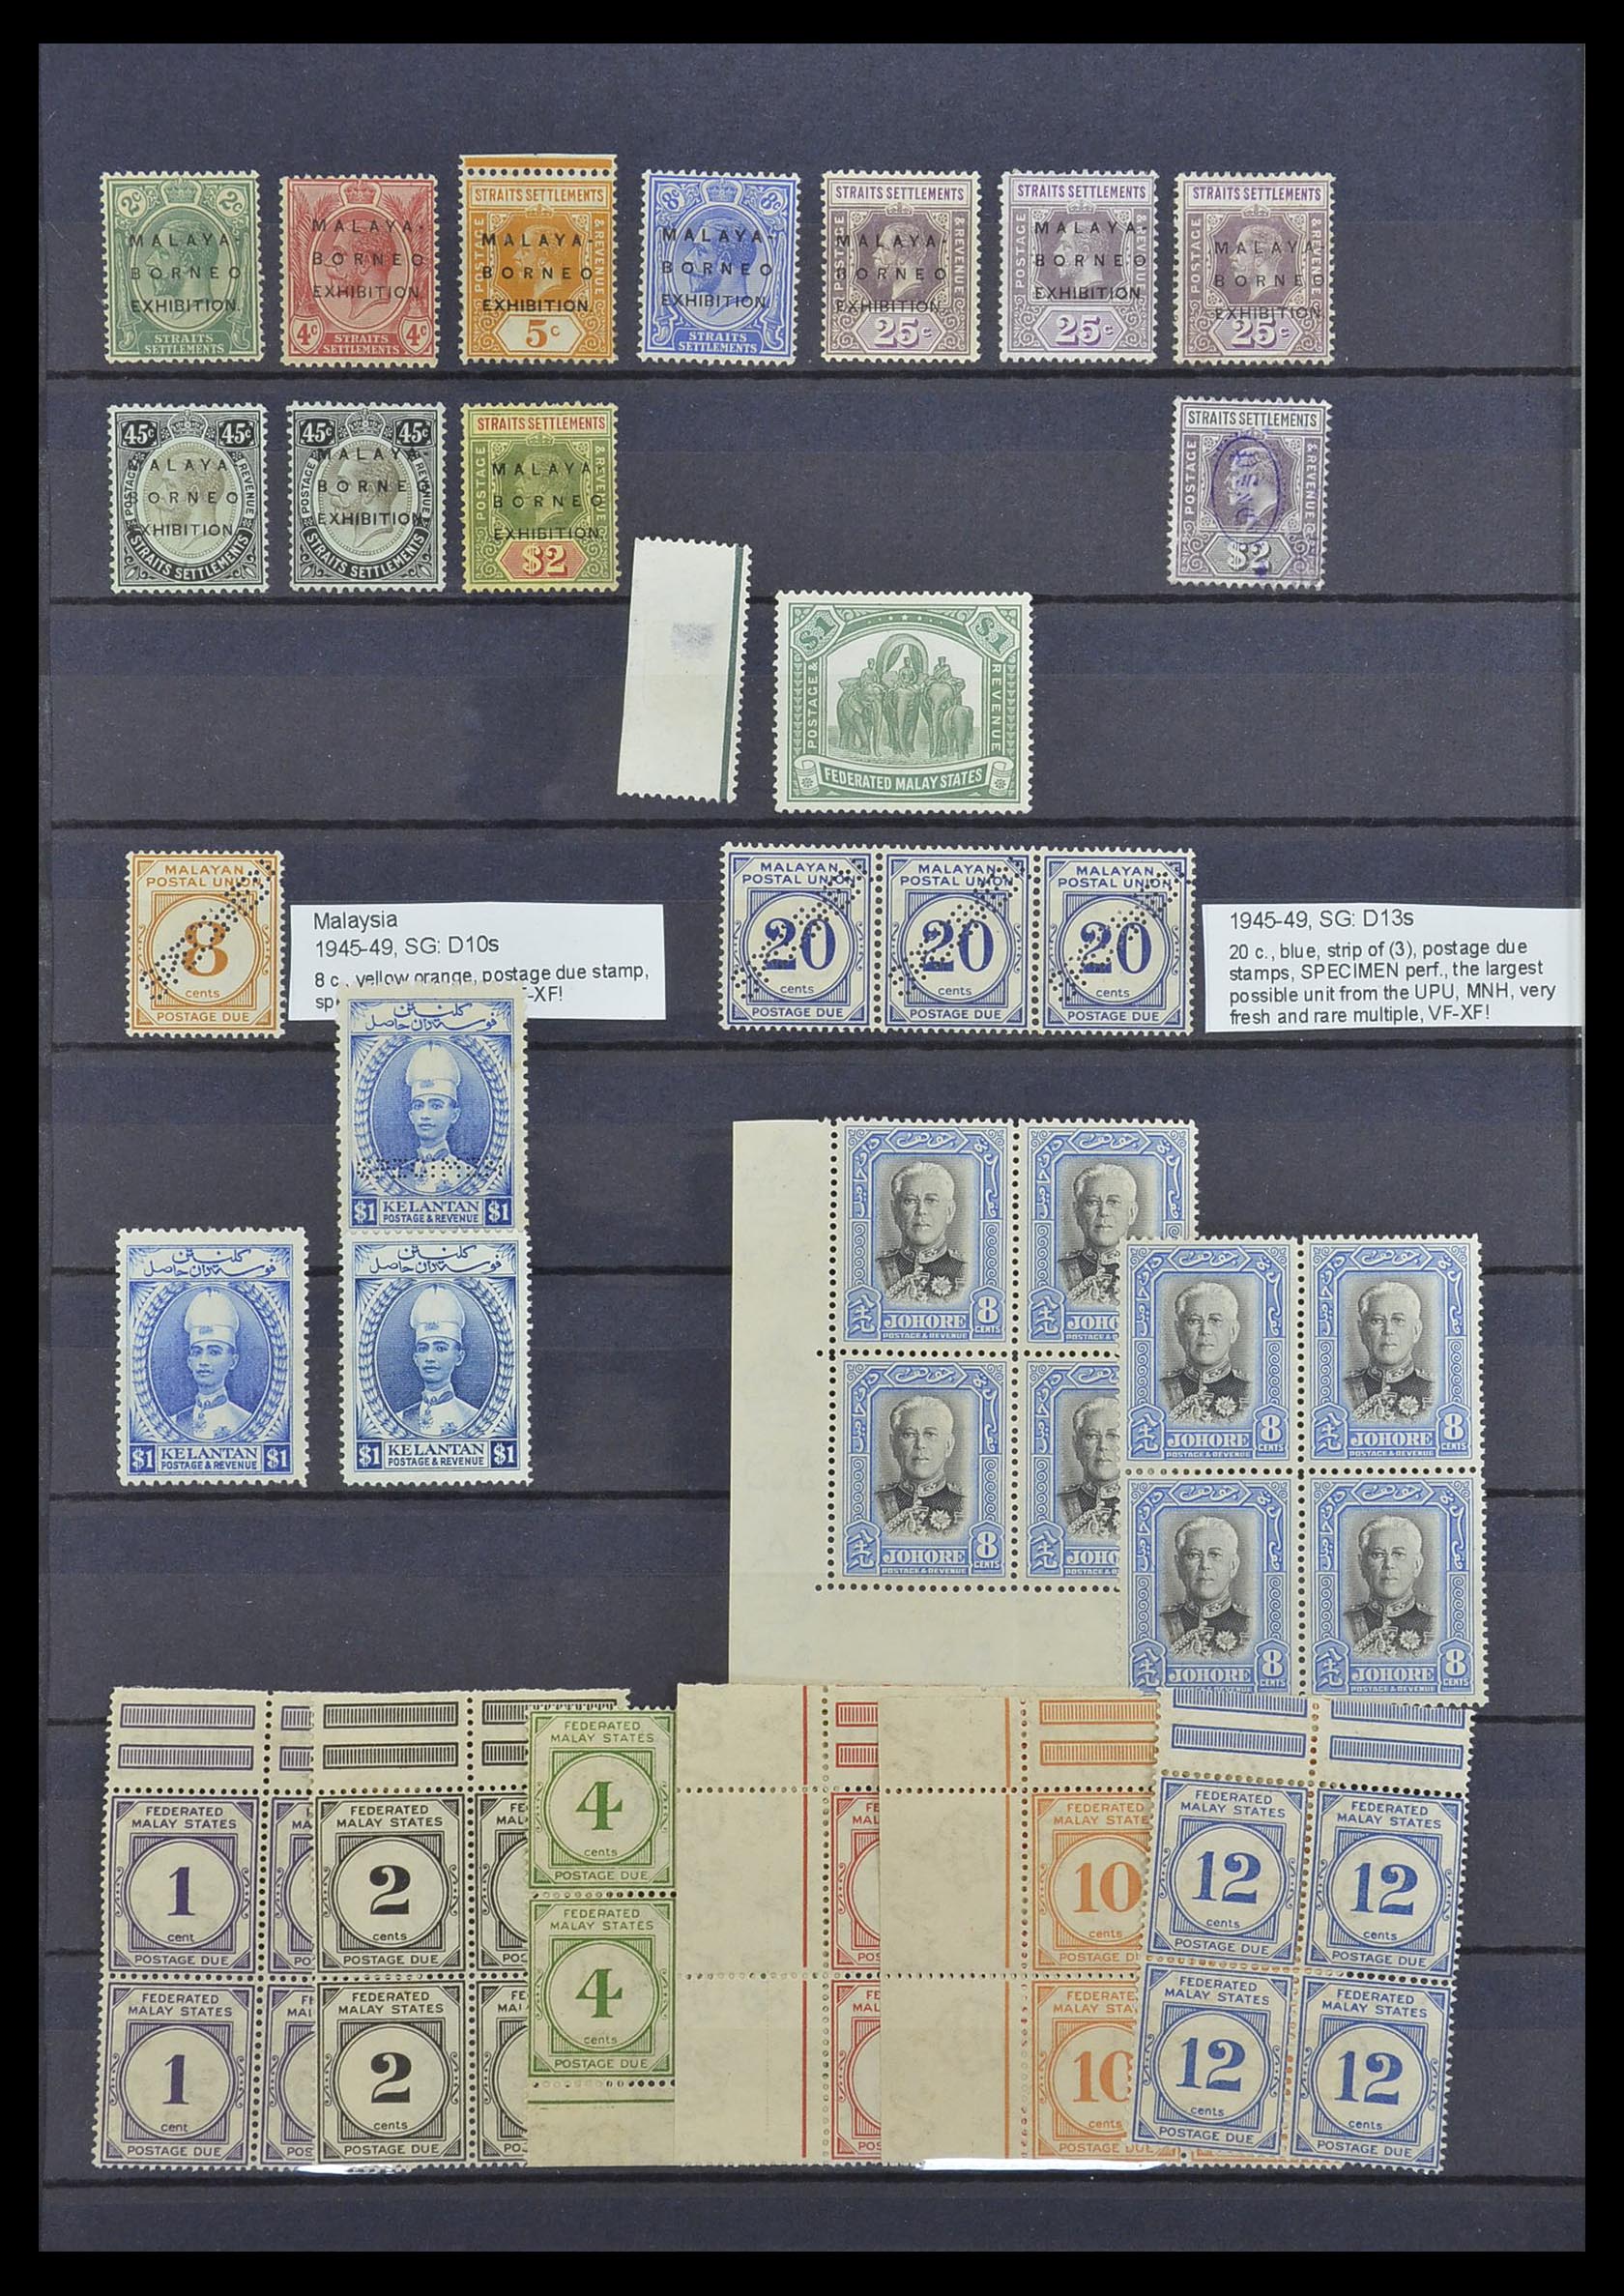 33640 032 - Stamp collection 33640 British Commonwealth key items 1853-1953.